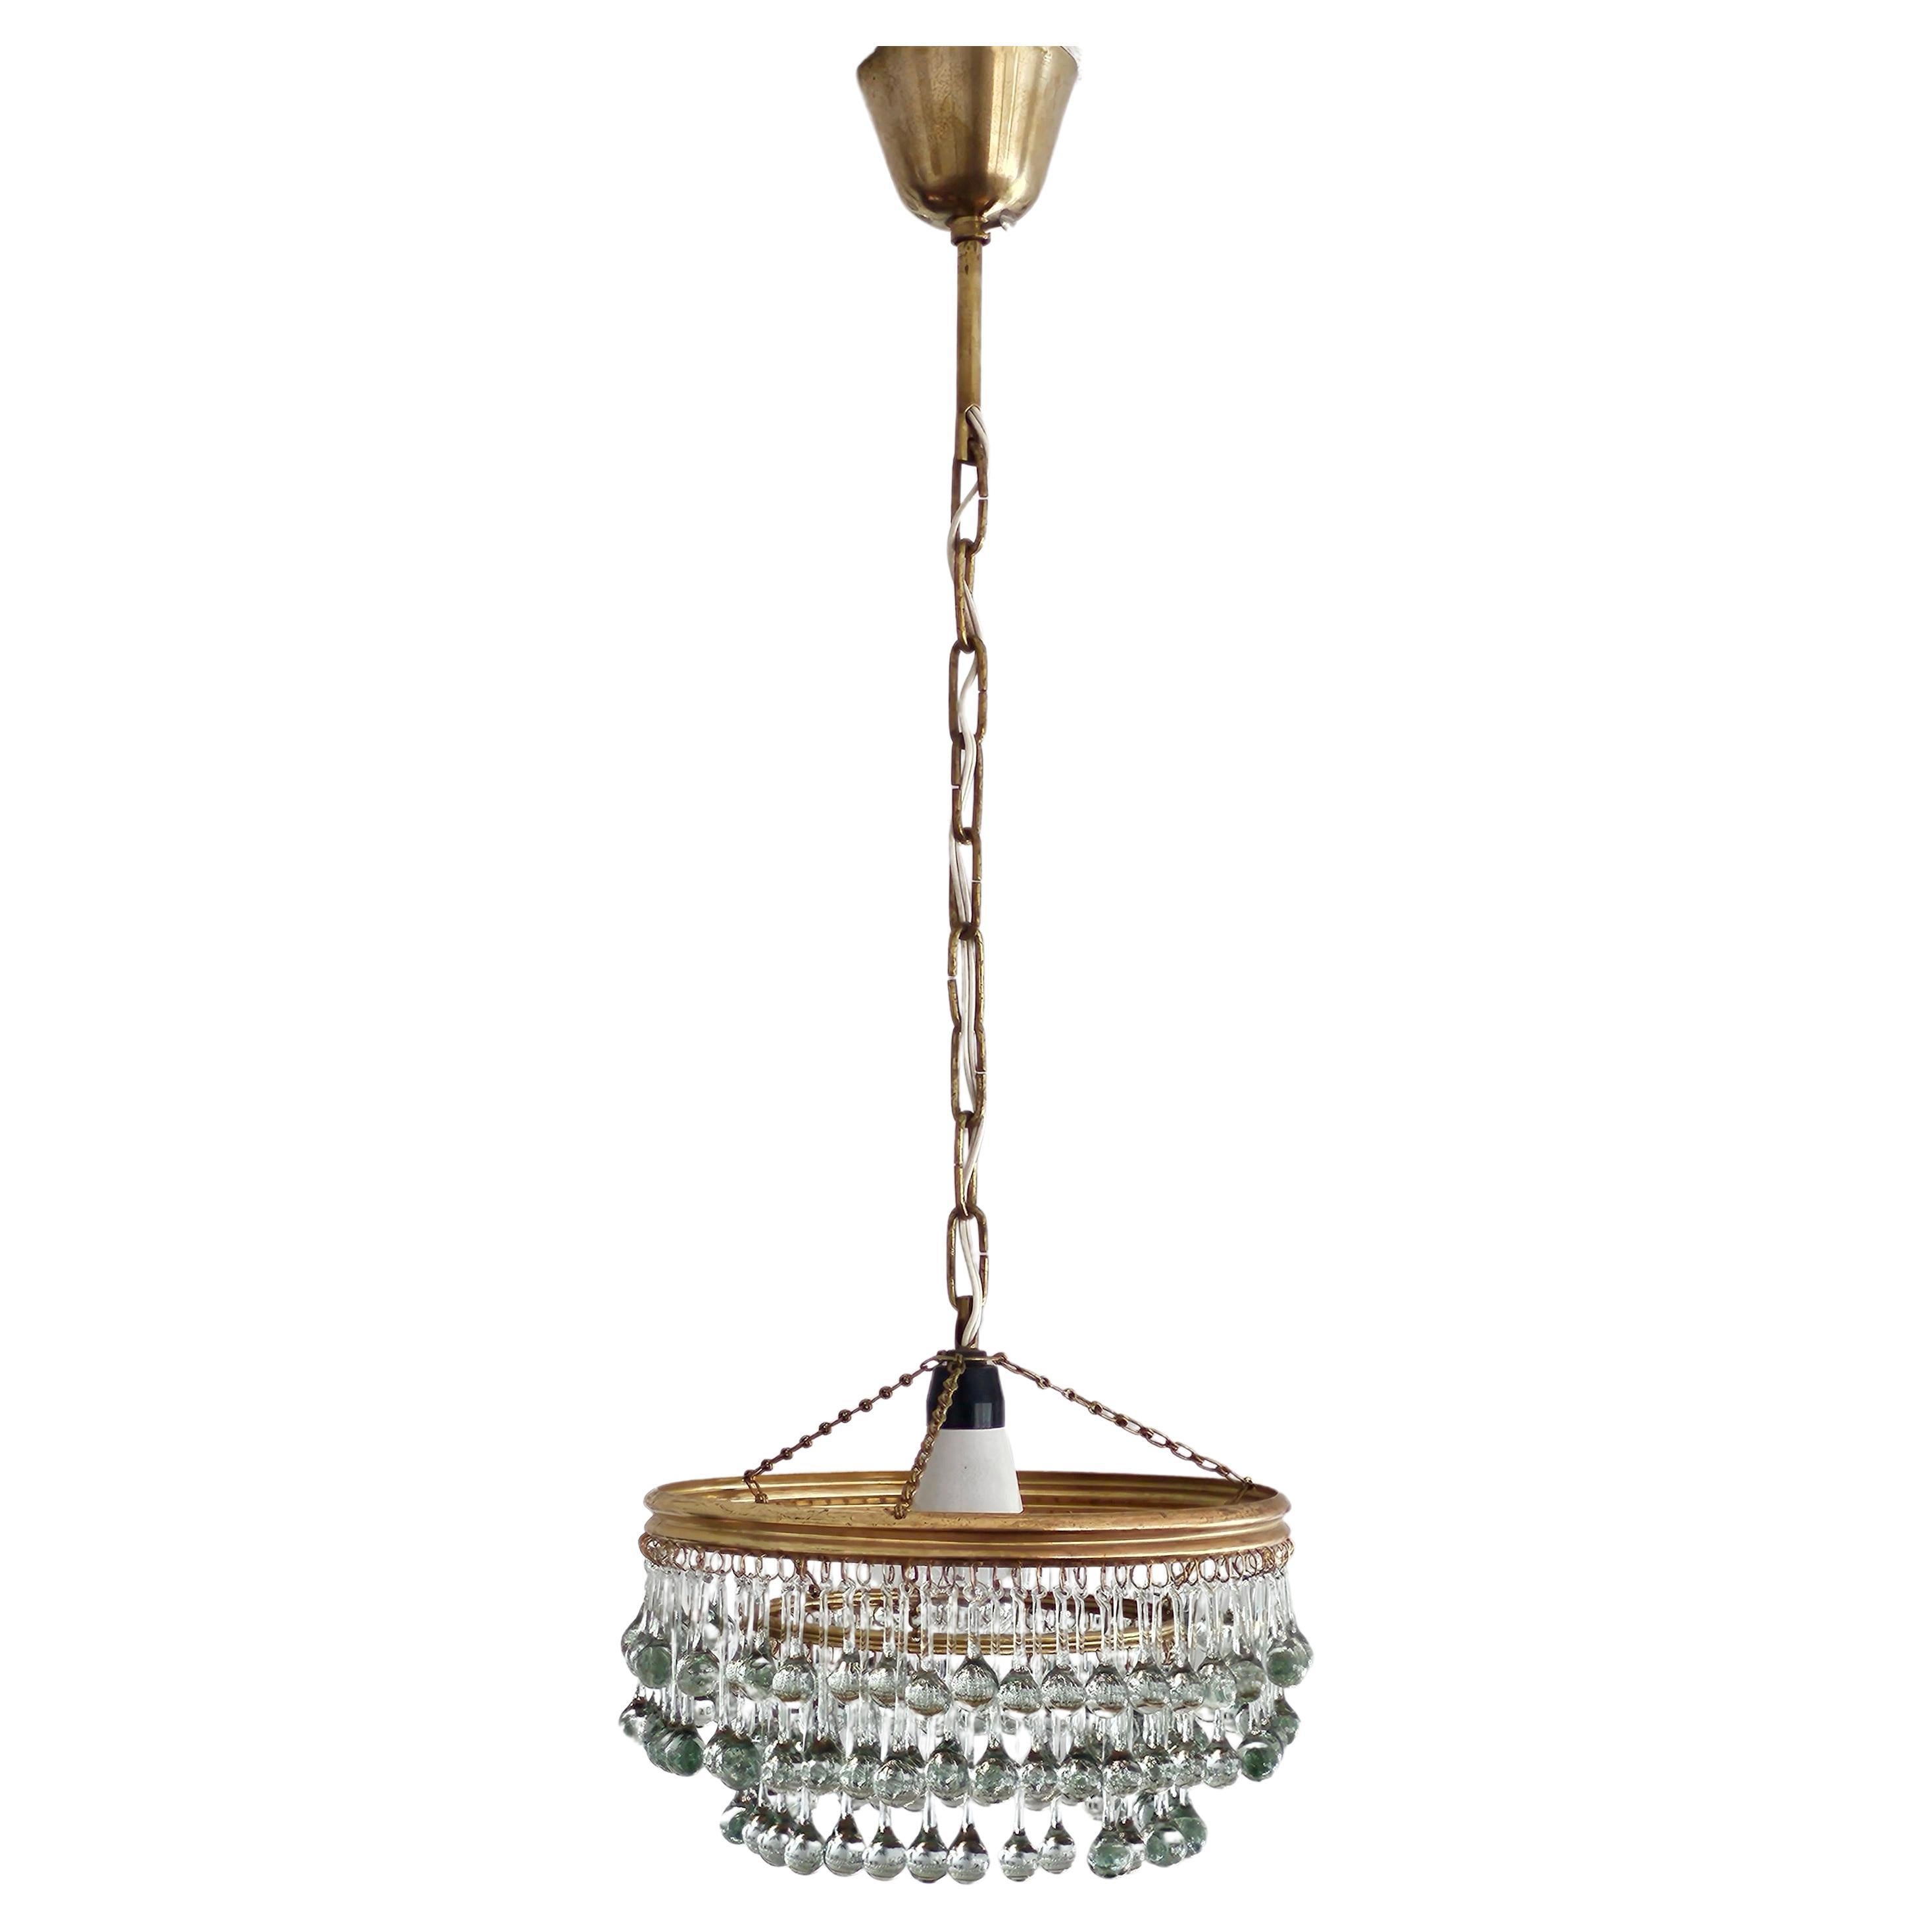 Small Hollywood Regency Chandelier with Mini Teardrop Crystals, Austria 1940s For Sale